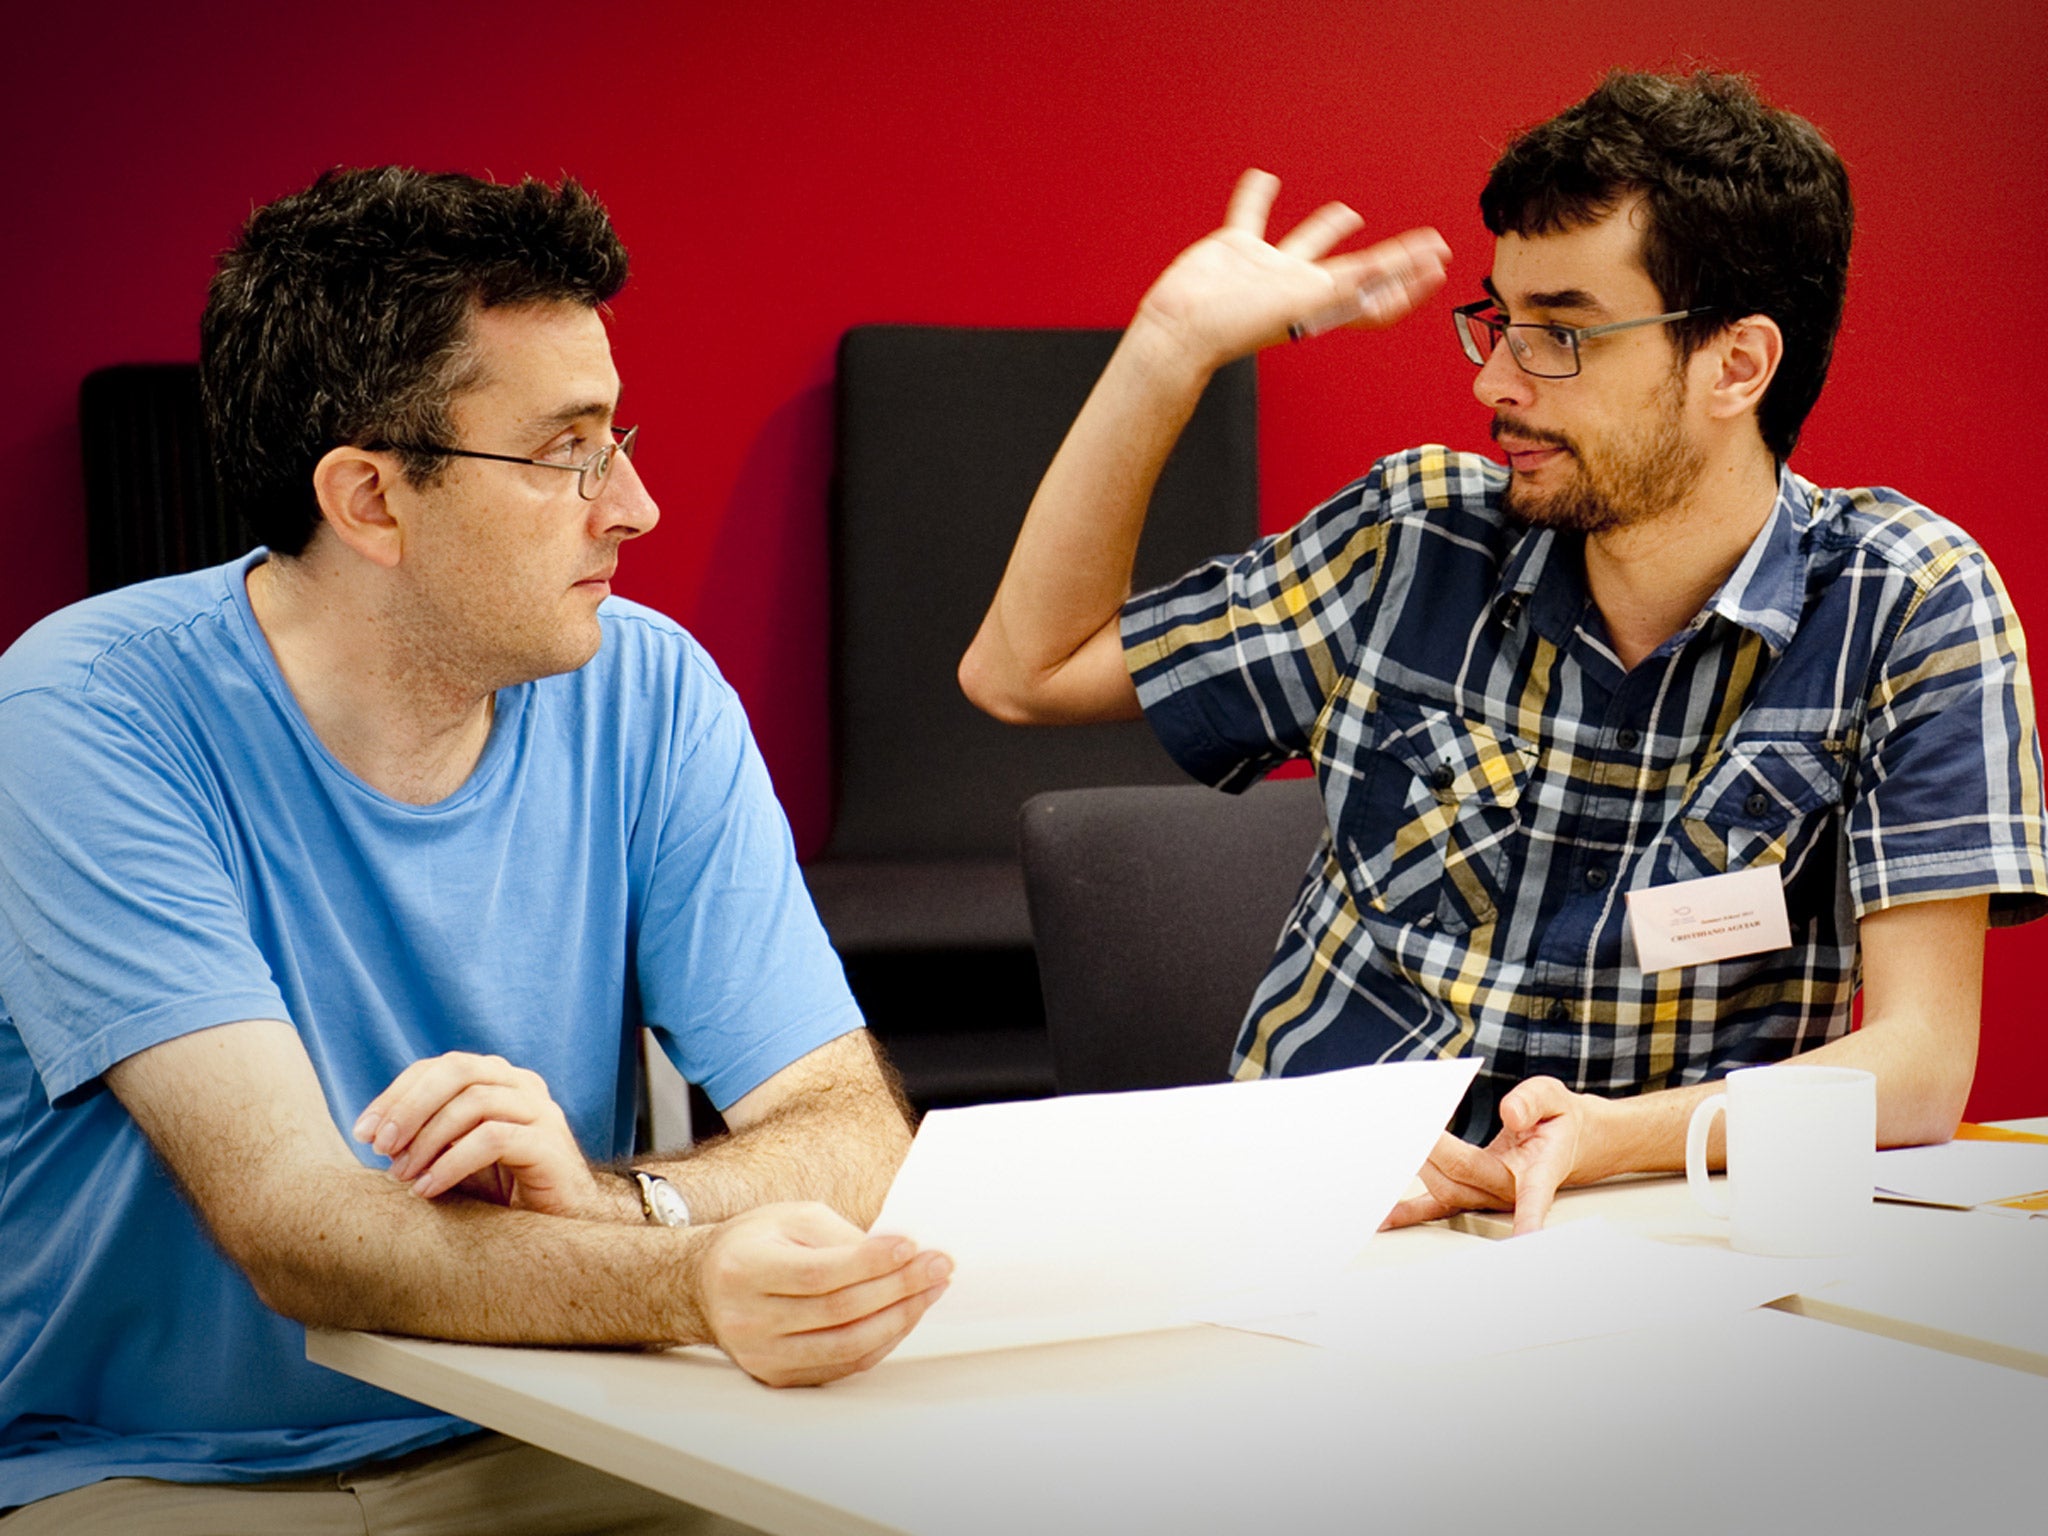 Found in translation: Daniel Hahn (left) stares down a wordy foe in a duel